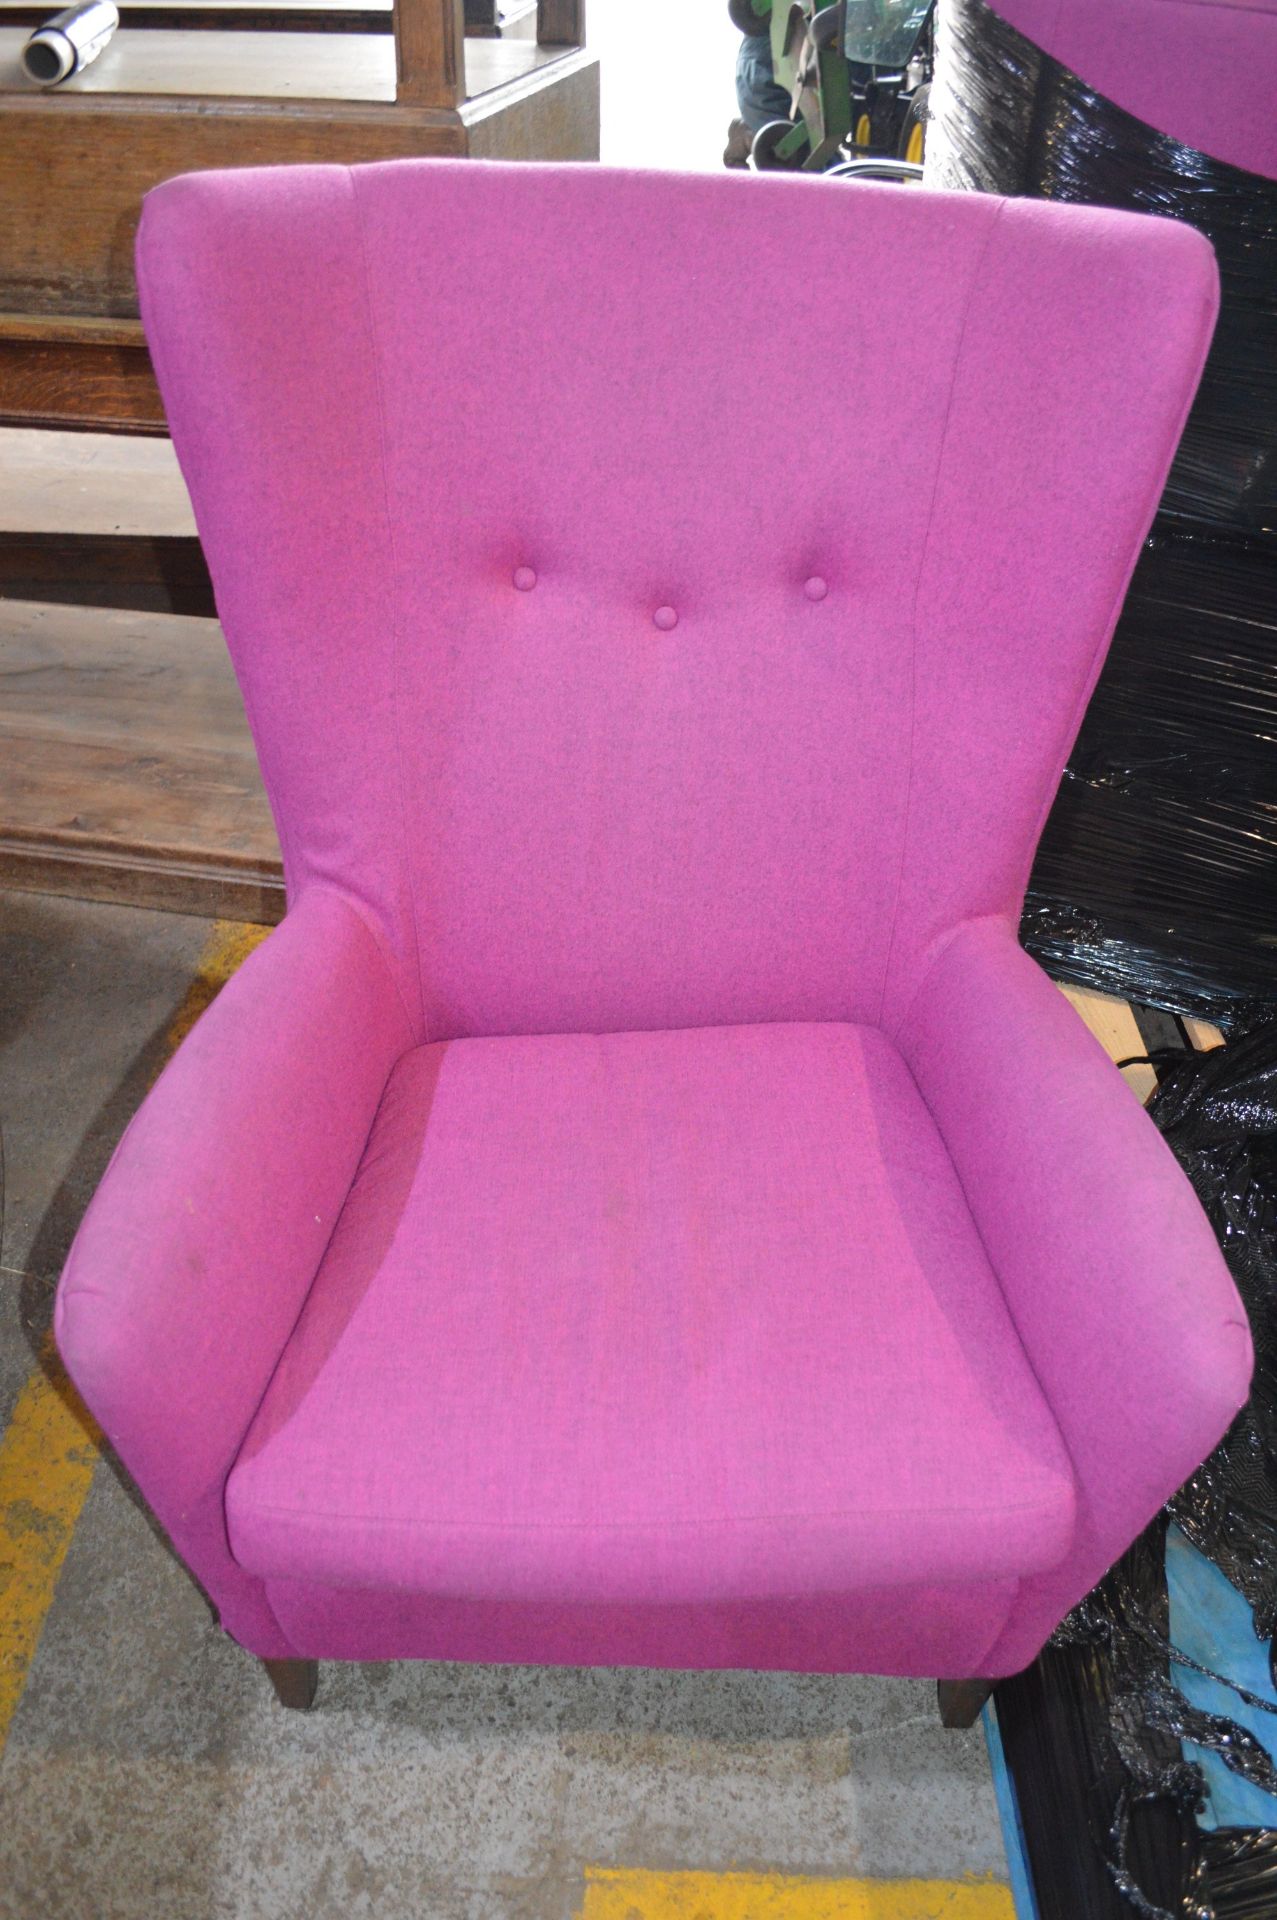 X1 LARGE HIGH BACK BLUE CLOTH CHAIR & X1 LARGE HIGH BACK PINK CLOTH CHAIR *NO VAT* - Image 5 of 7